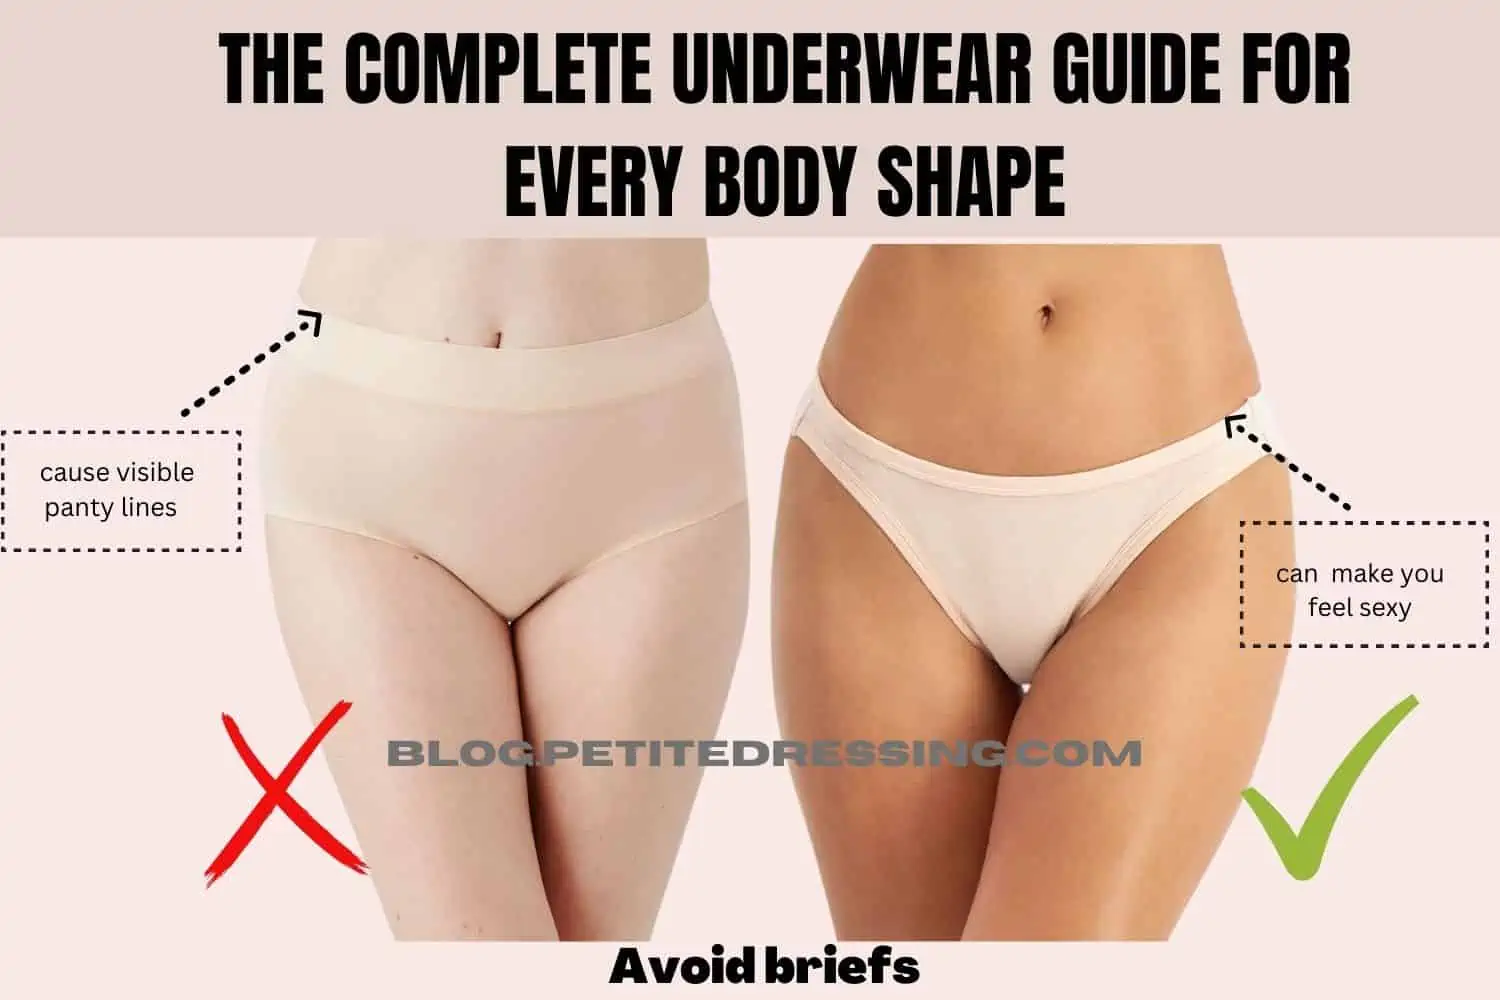 Finding the Best Underwear For Your Body Type I A Beginners Guide – s o m e  w h e r e UNKNOWN